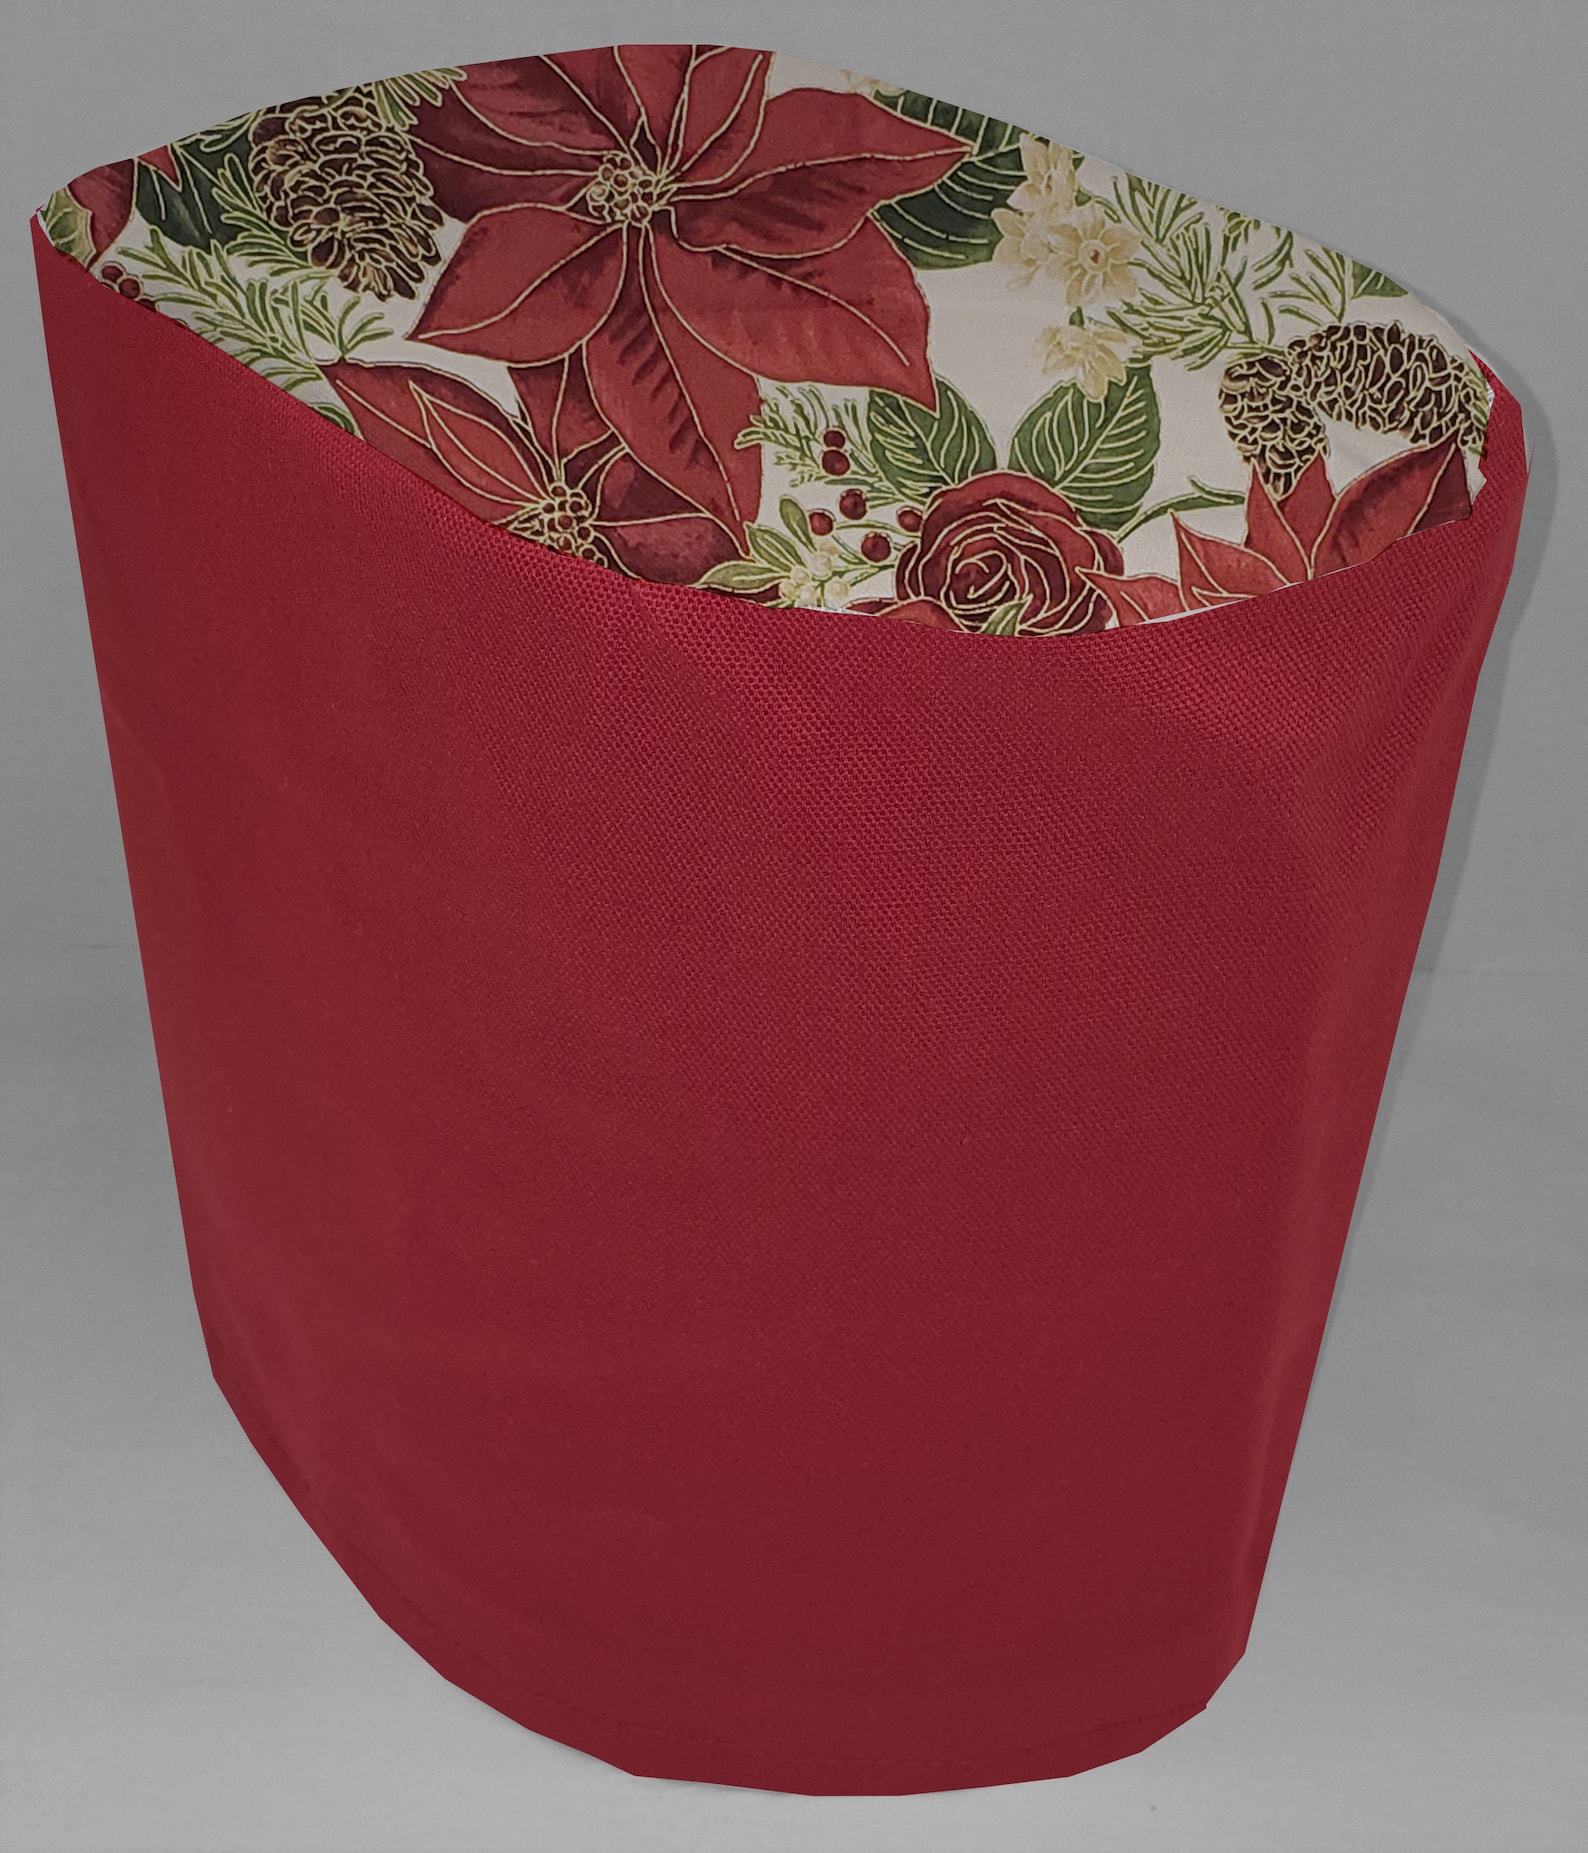 Canvas Christmas Poinsettia Cover Compatible with Keurig Coffee Maker by Penny's Needful Things (Burgundy, K10 / K15 / B31 Mini Keurig) - image 1 of 1